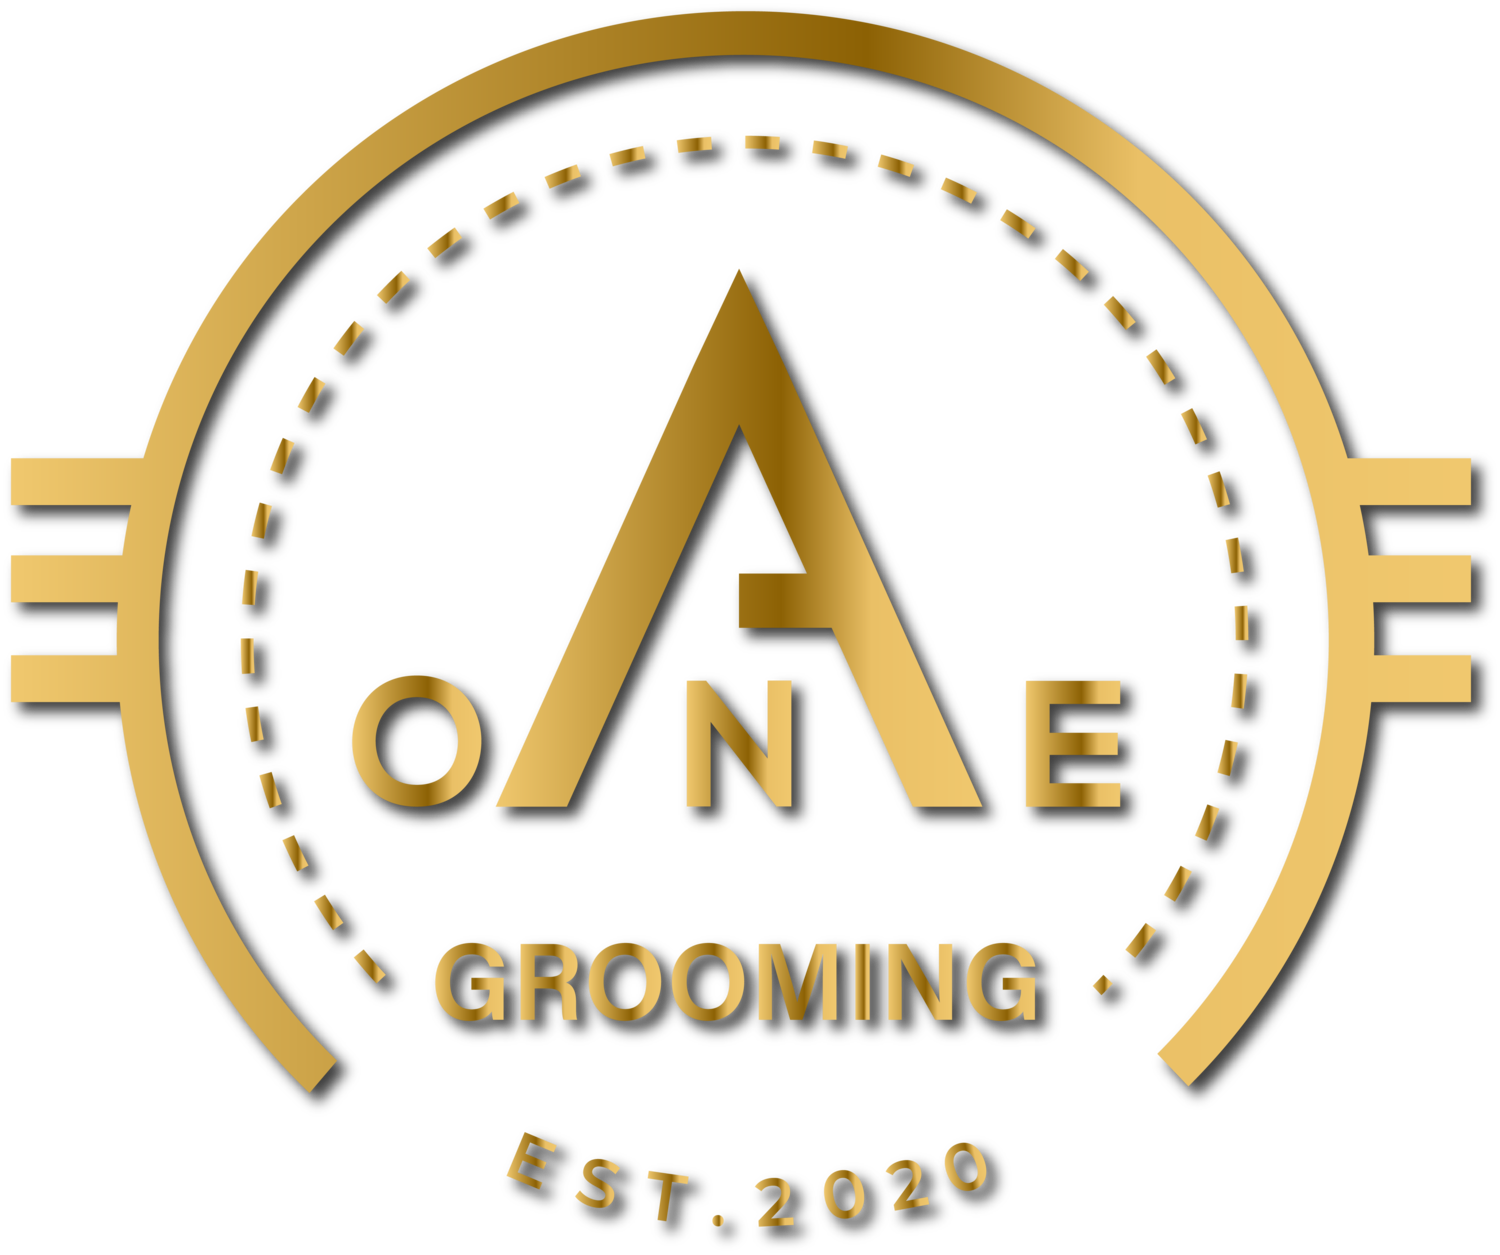 A One Grooming